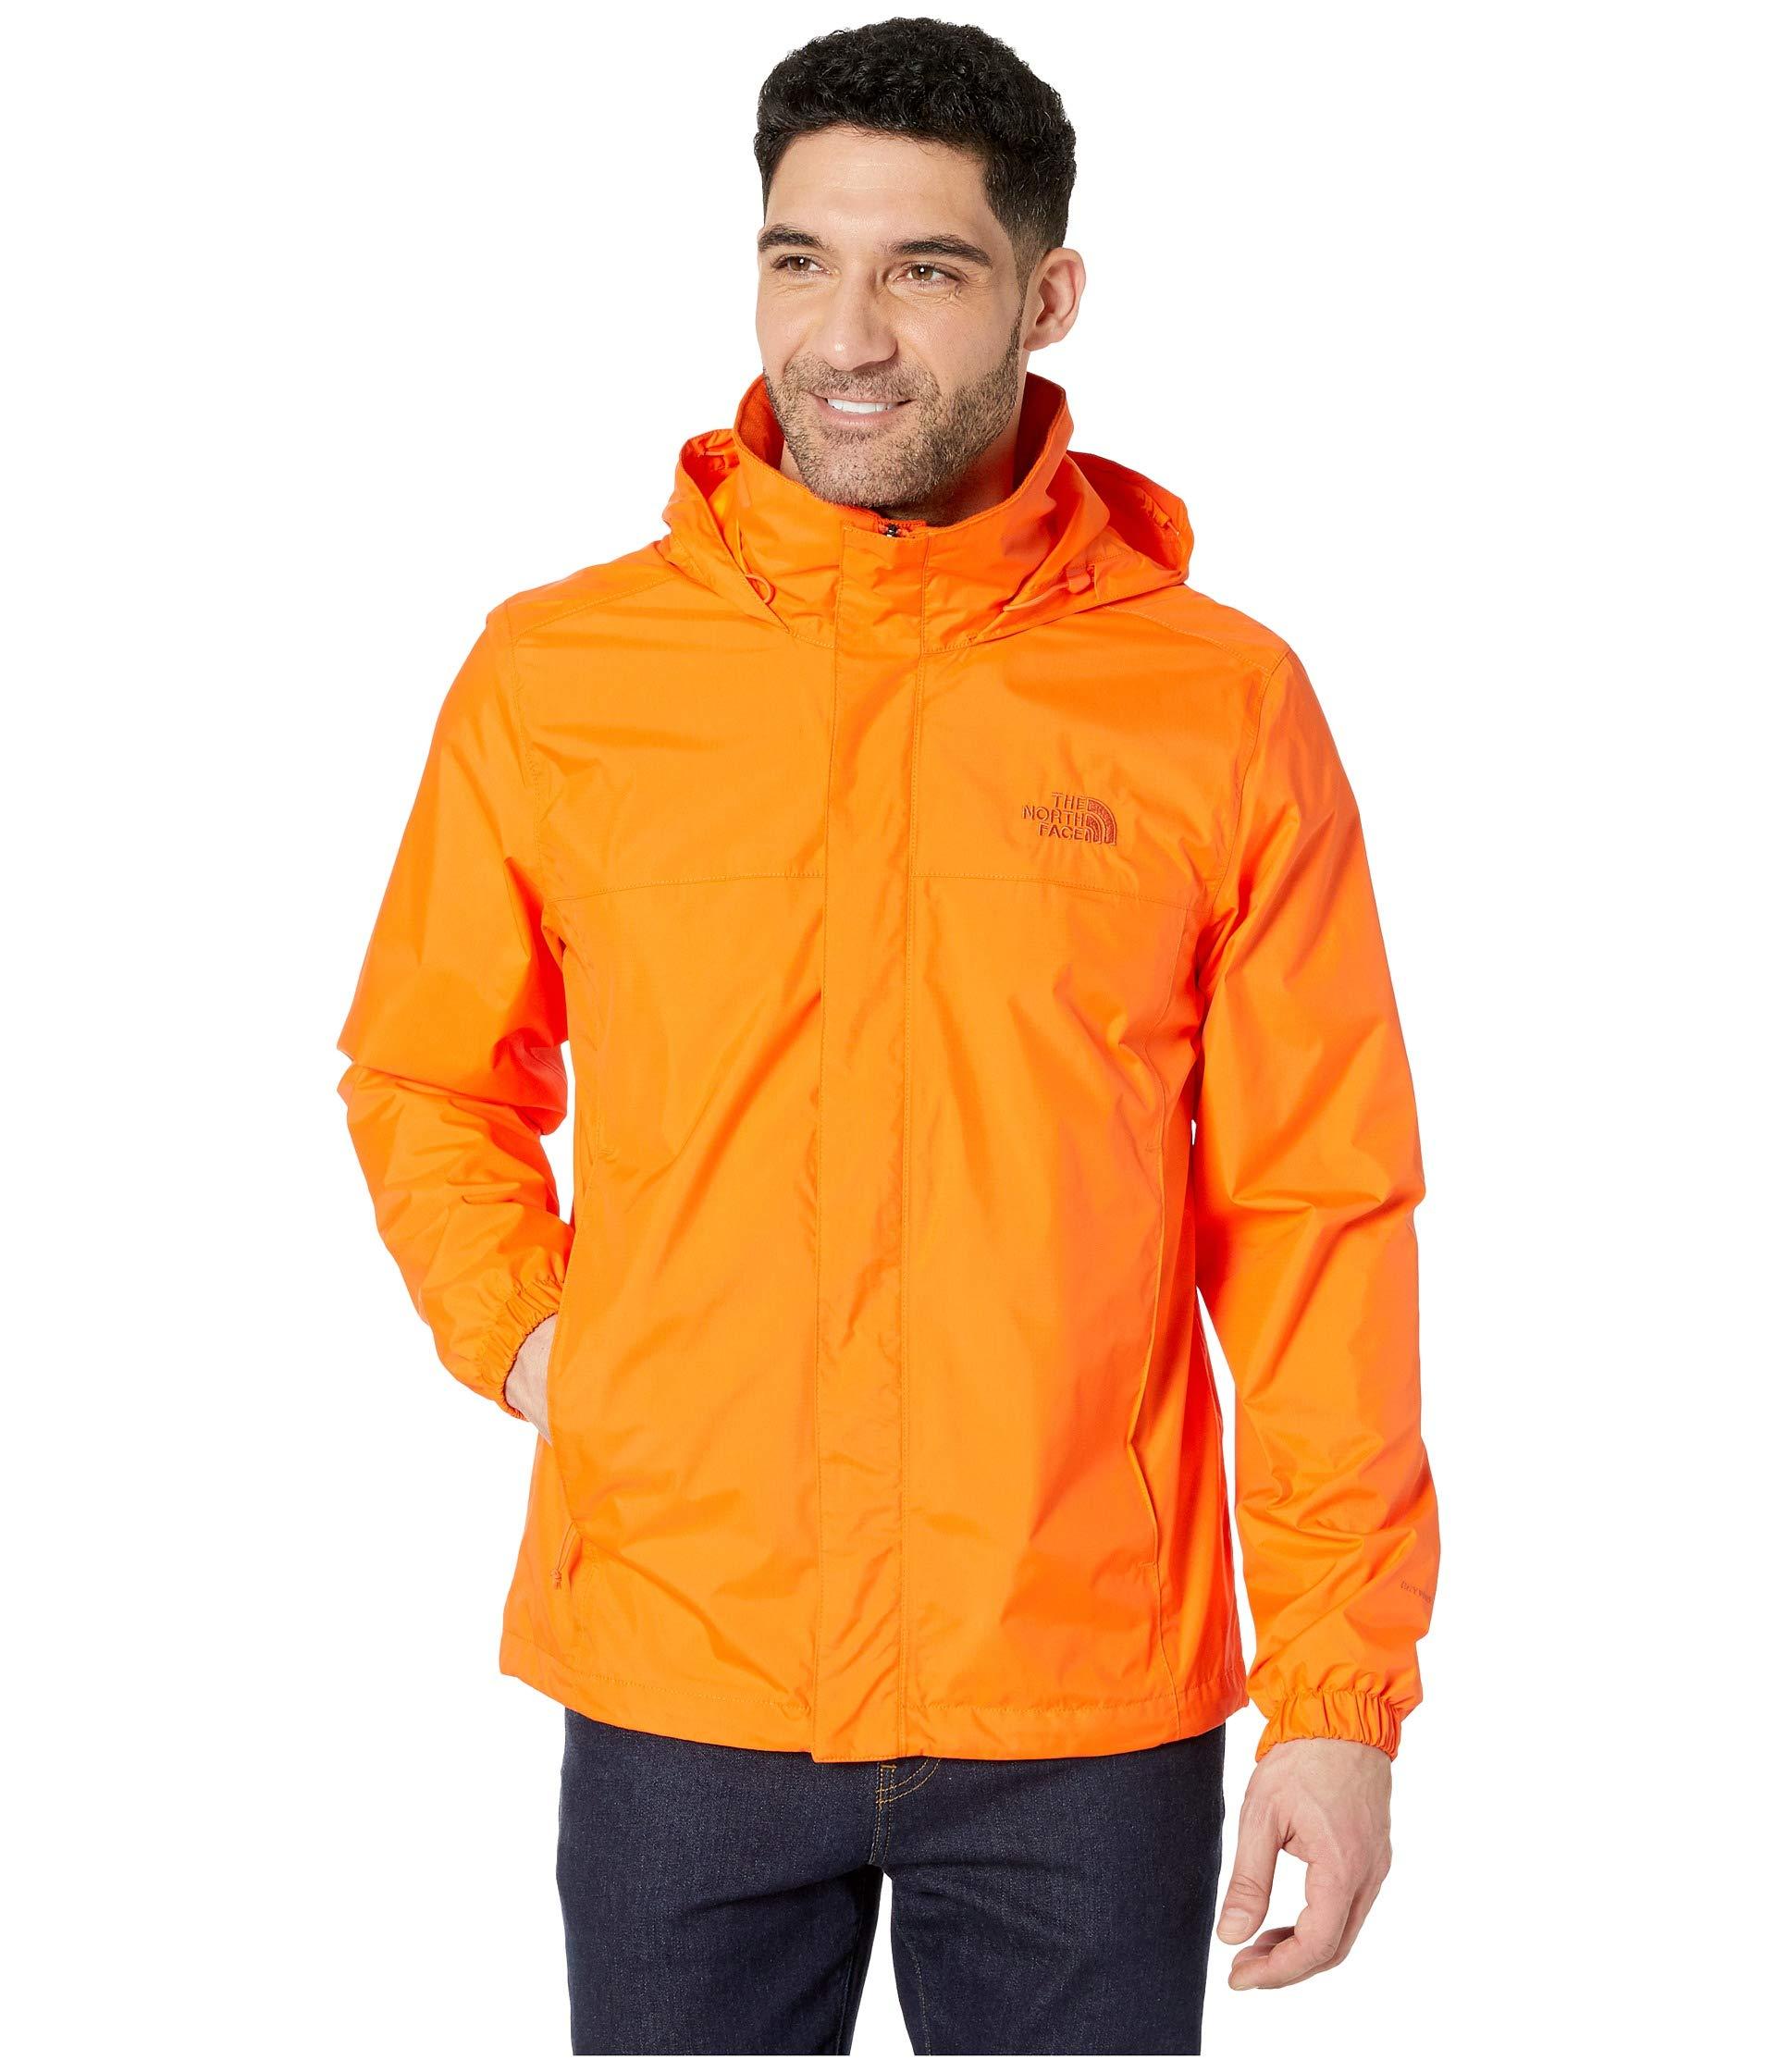 The North Face Synthetic Resolve 2 Jacket in Orange for Men - Lyst